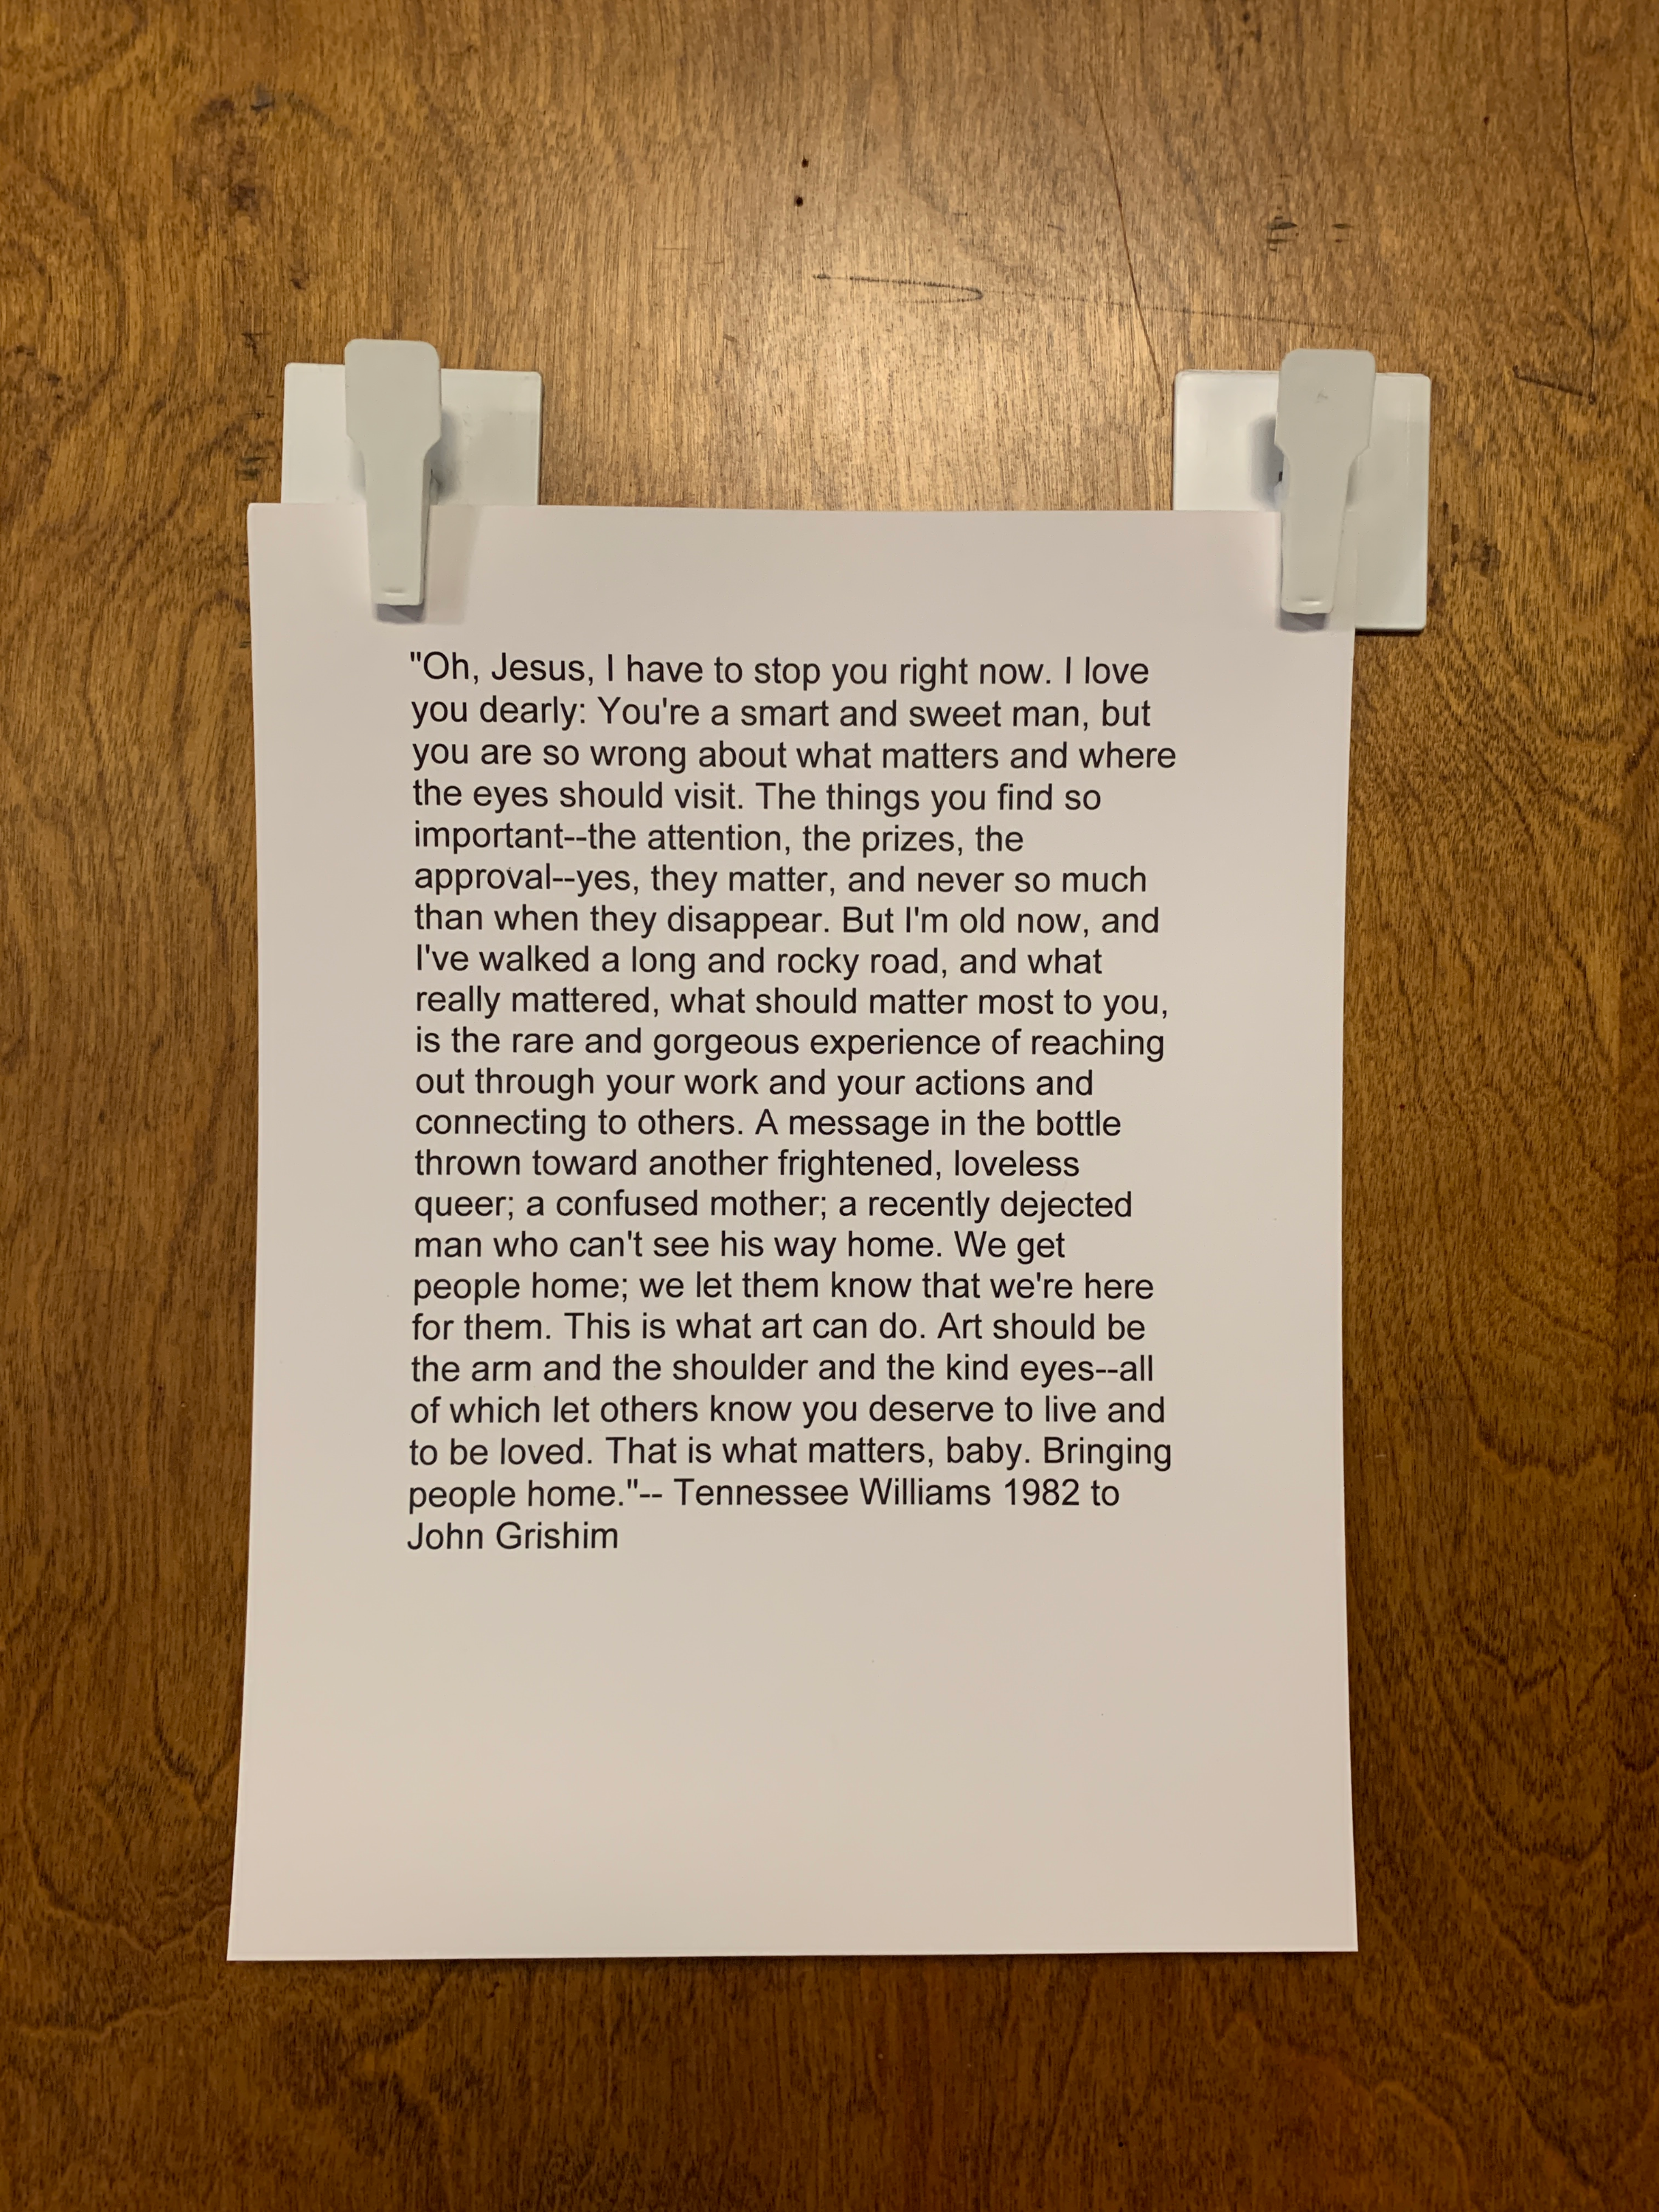 A paper with a quote posted on a door